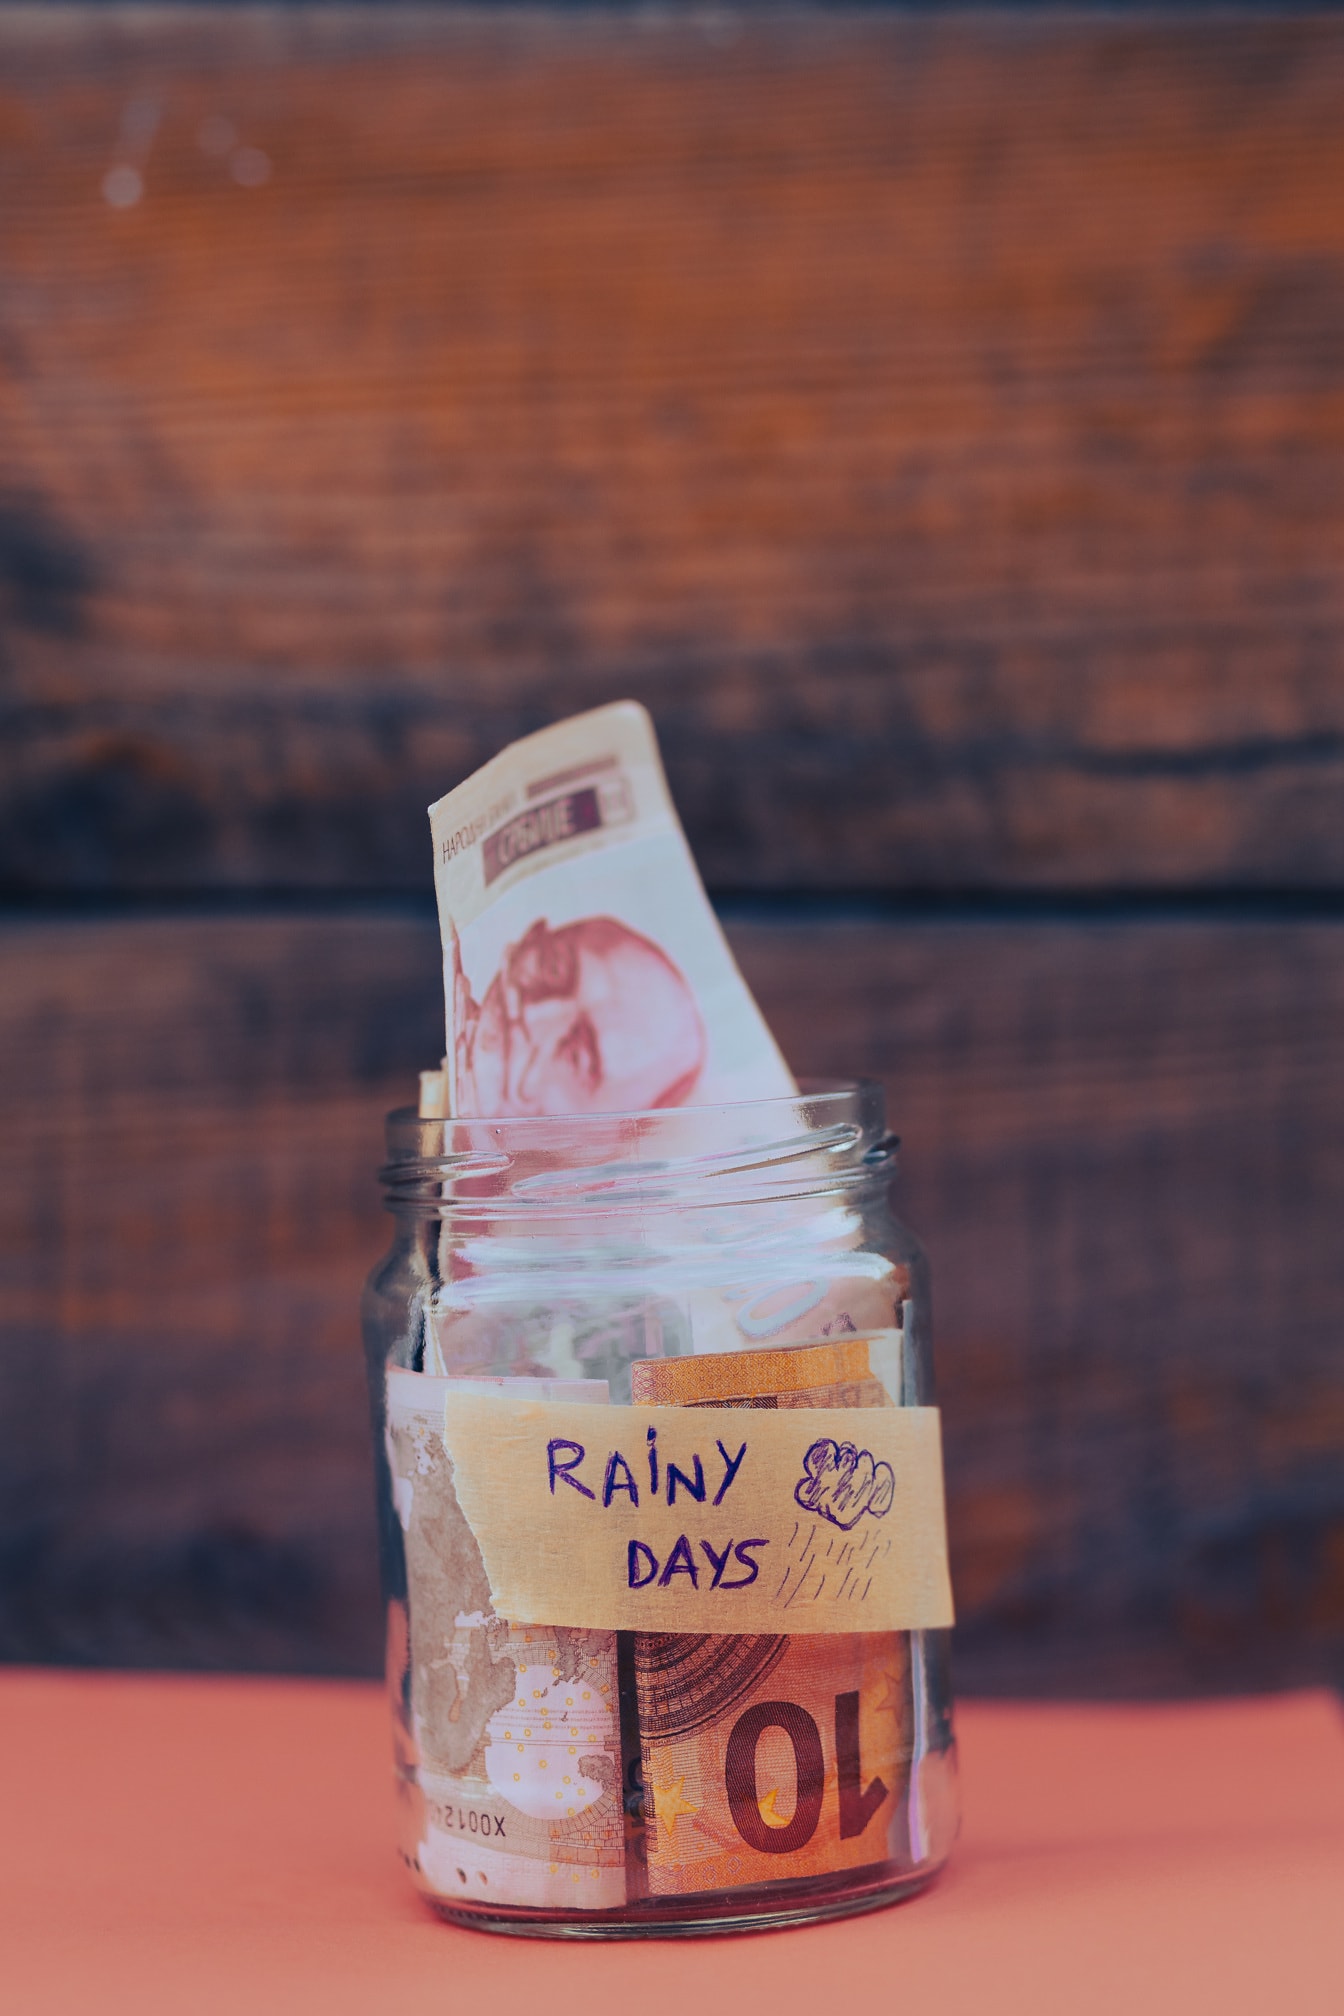 Paper money savings in glass jar for rainy days